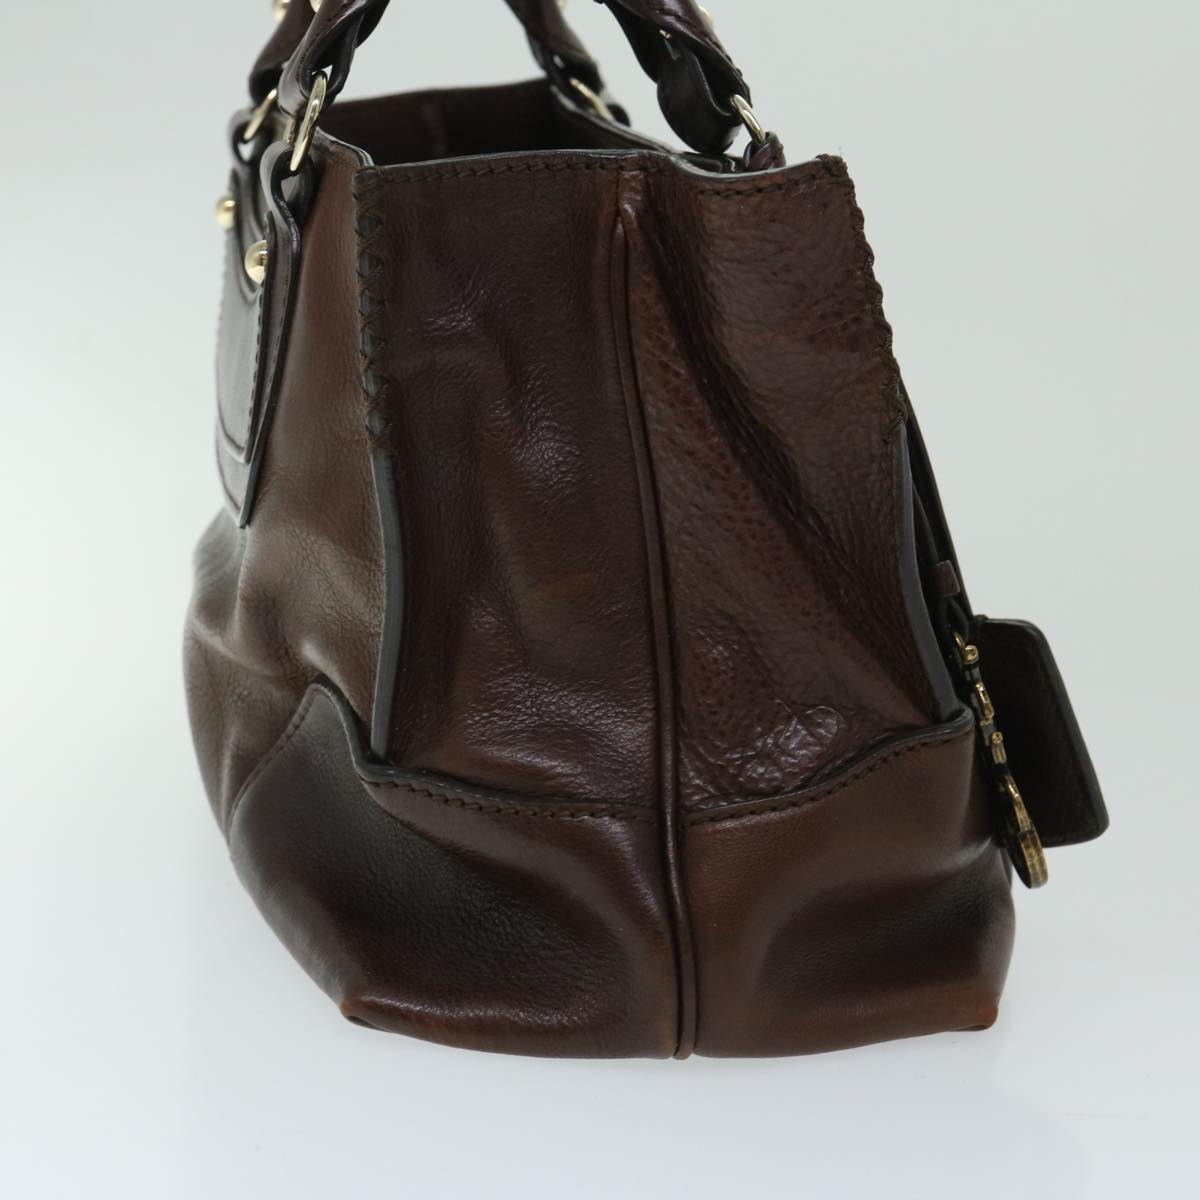 CELINE Hand Bag Leather Brown Auth 68027